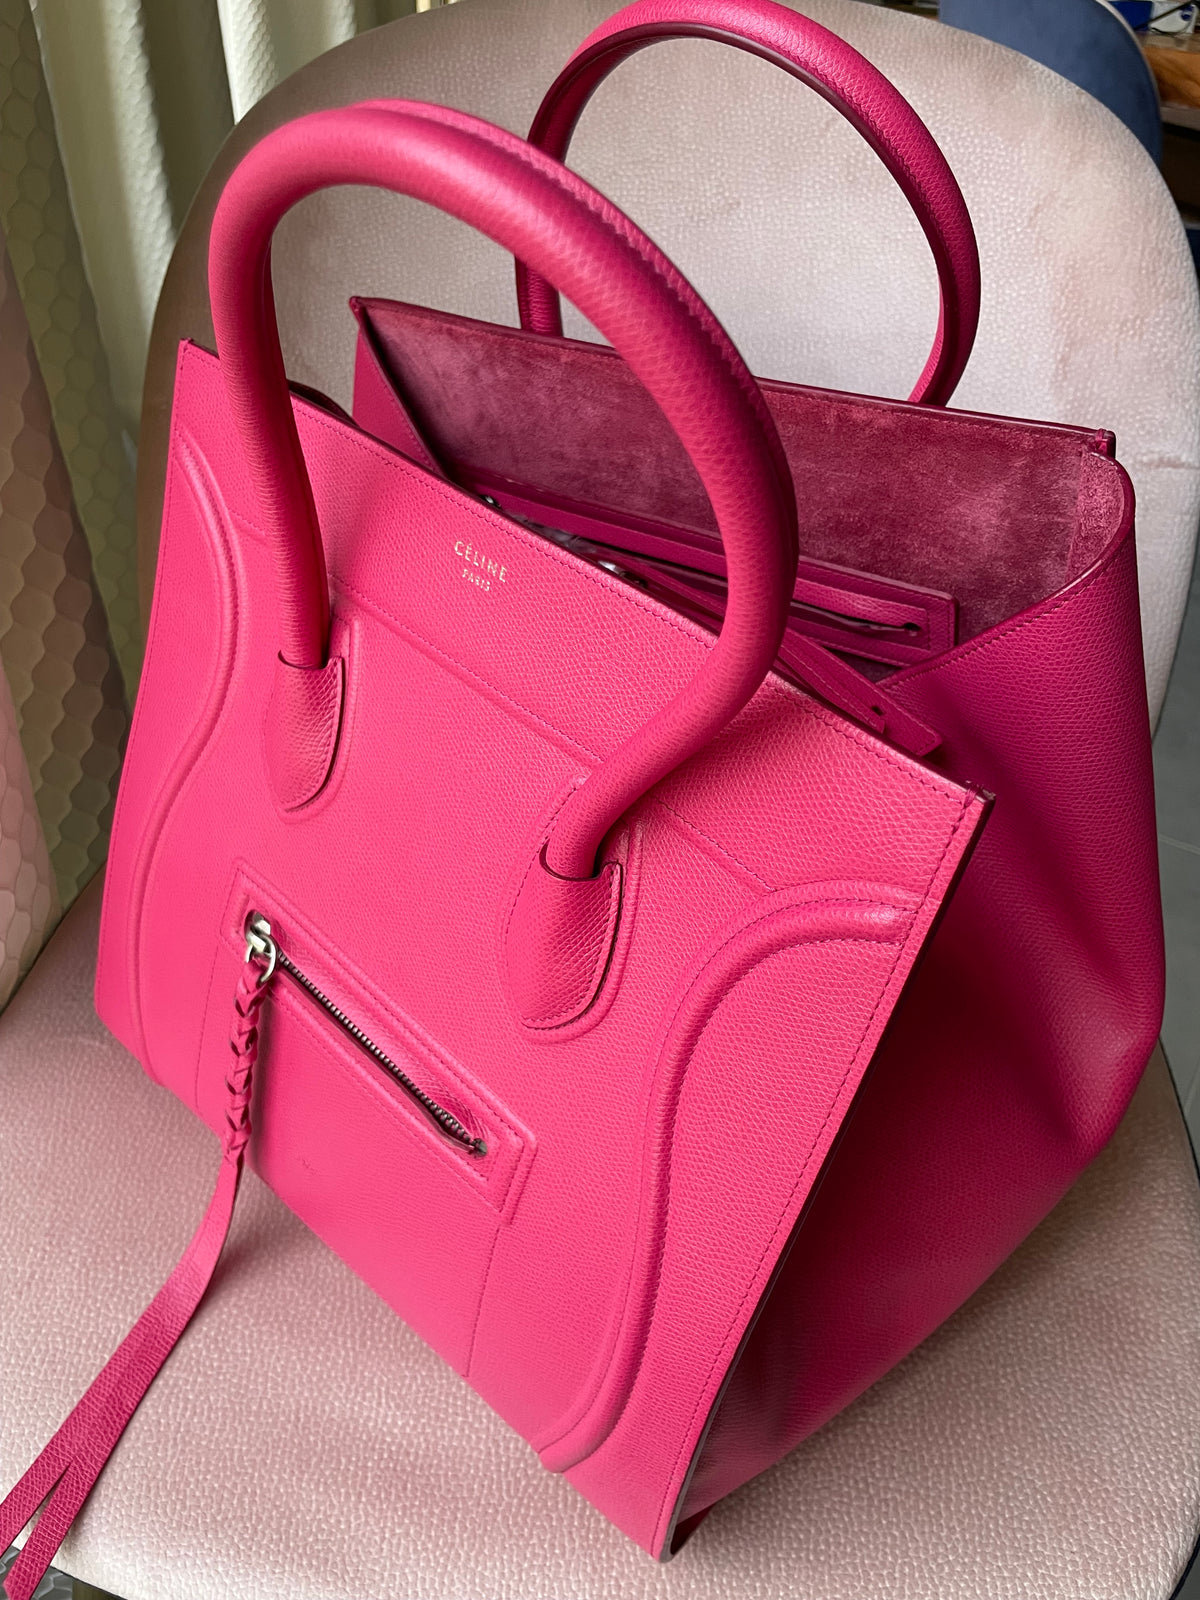 Miss Shop Tennessee Shoulder Bag In Fuchsia | MYER